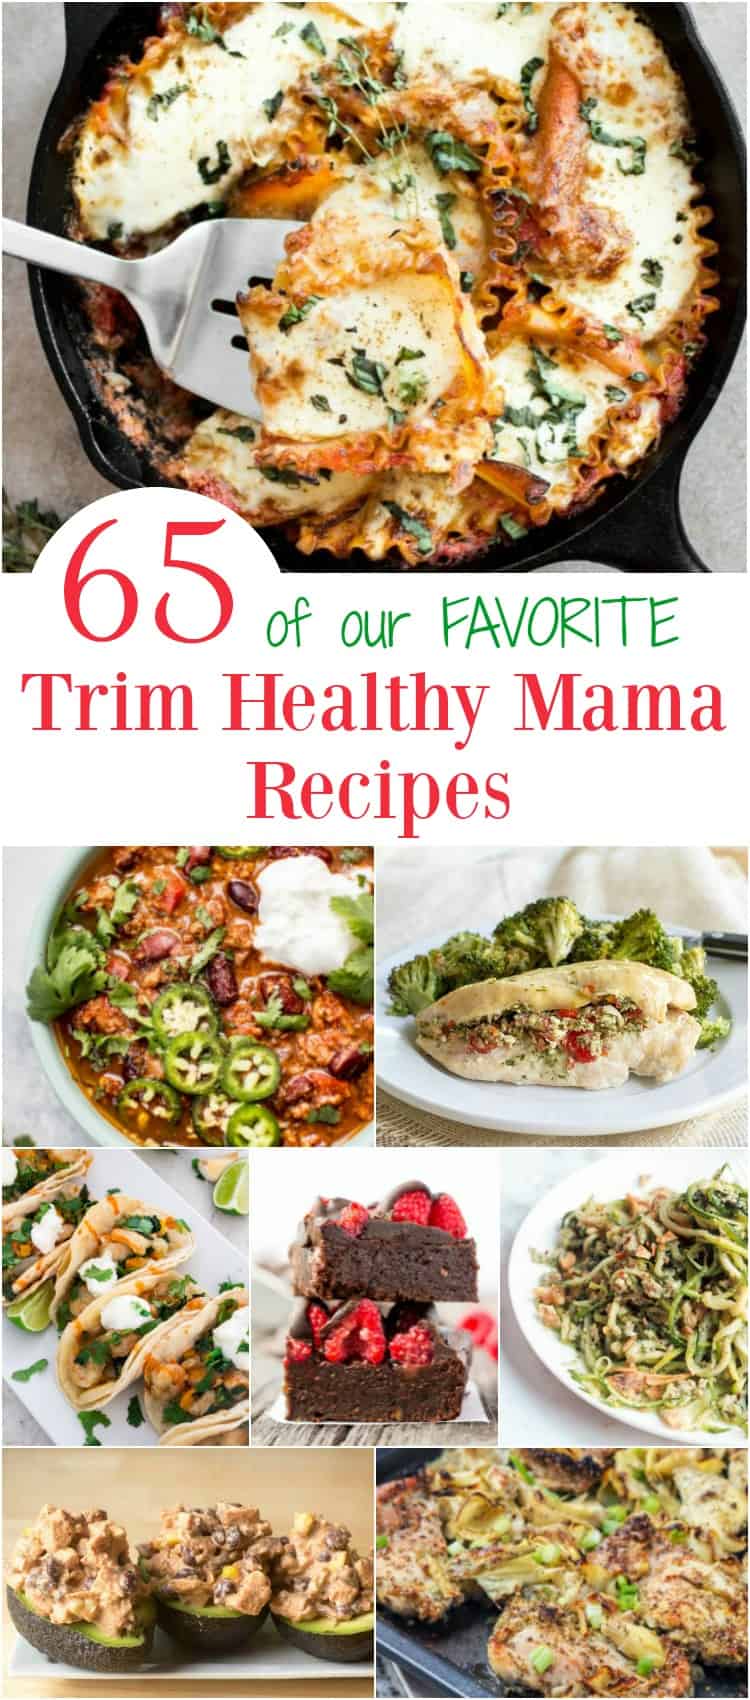 65 of our favorite Trim Health Mama Recipes. This is a full list of 65 recipes that are for breakfast, lunch and dinner. You will also find sugar free dessert recipes your whole family will love. I love easy recipes and especially ones the can go in the crock pot. This is a great list for beginners and has chicken and beef recipes. Many of these recipes will work if you are looking for Keto and low carb recipes. 